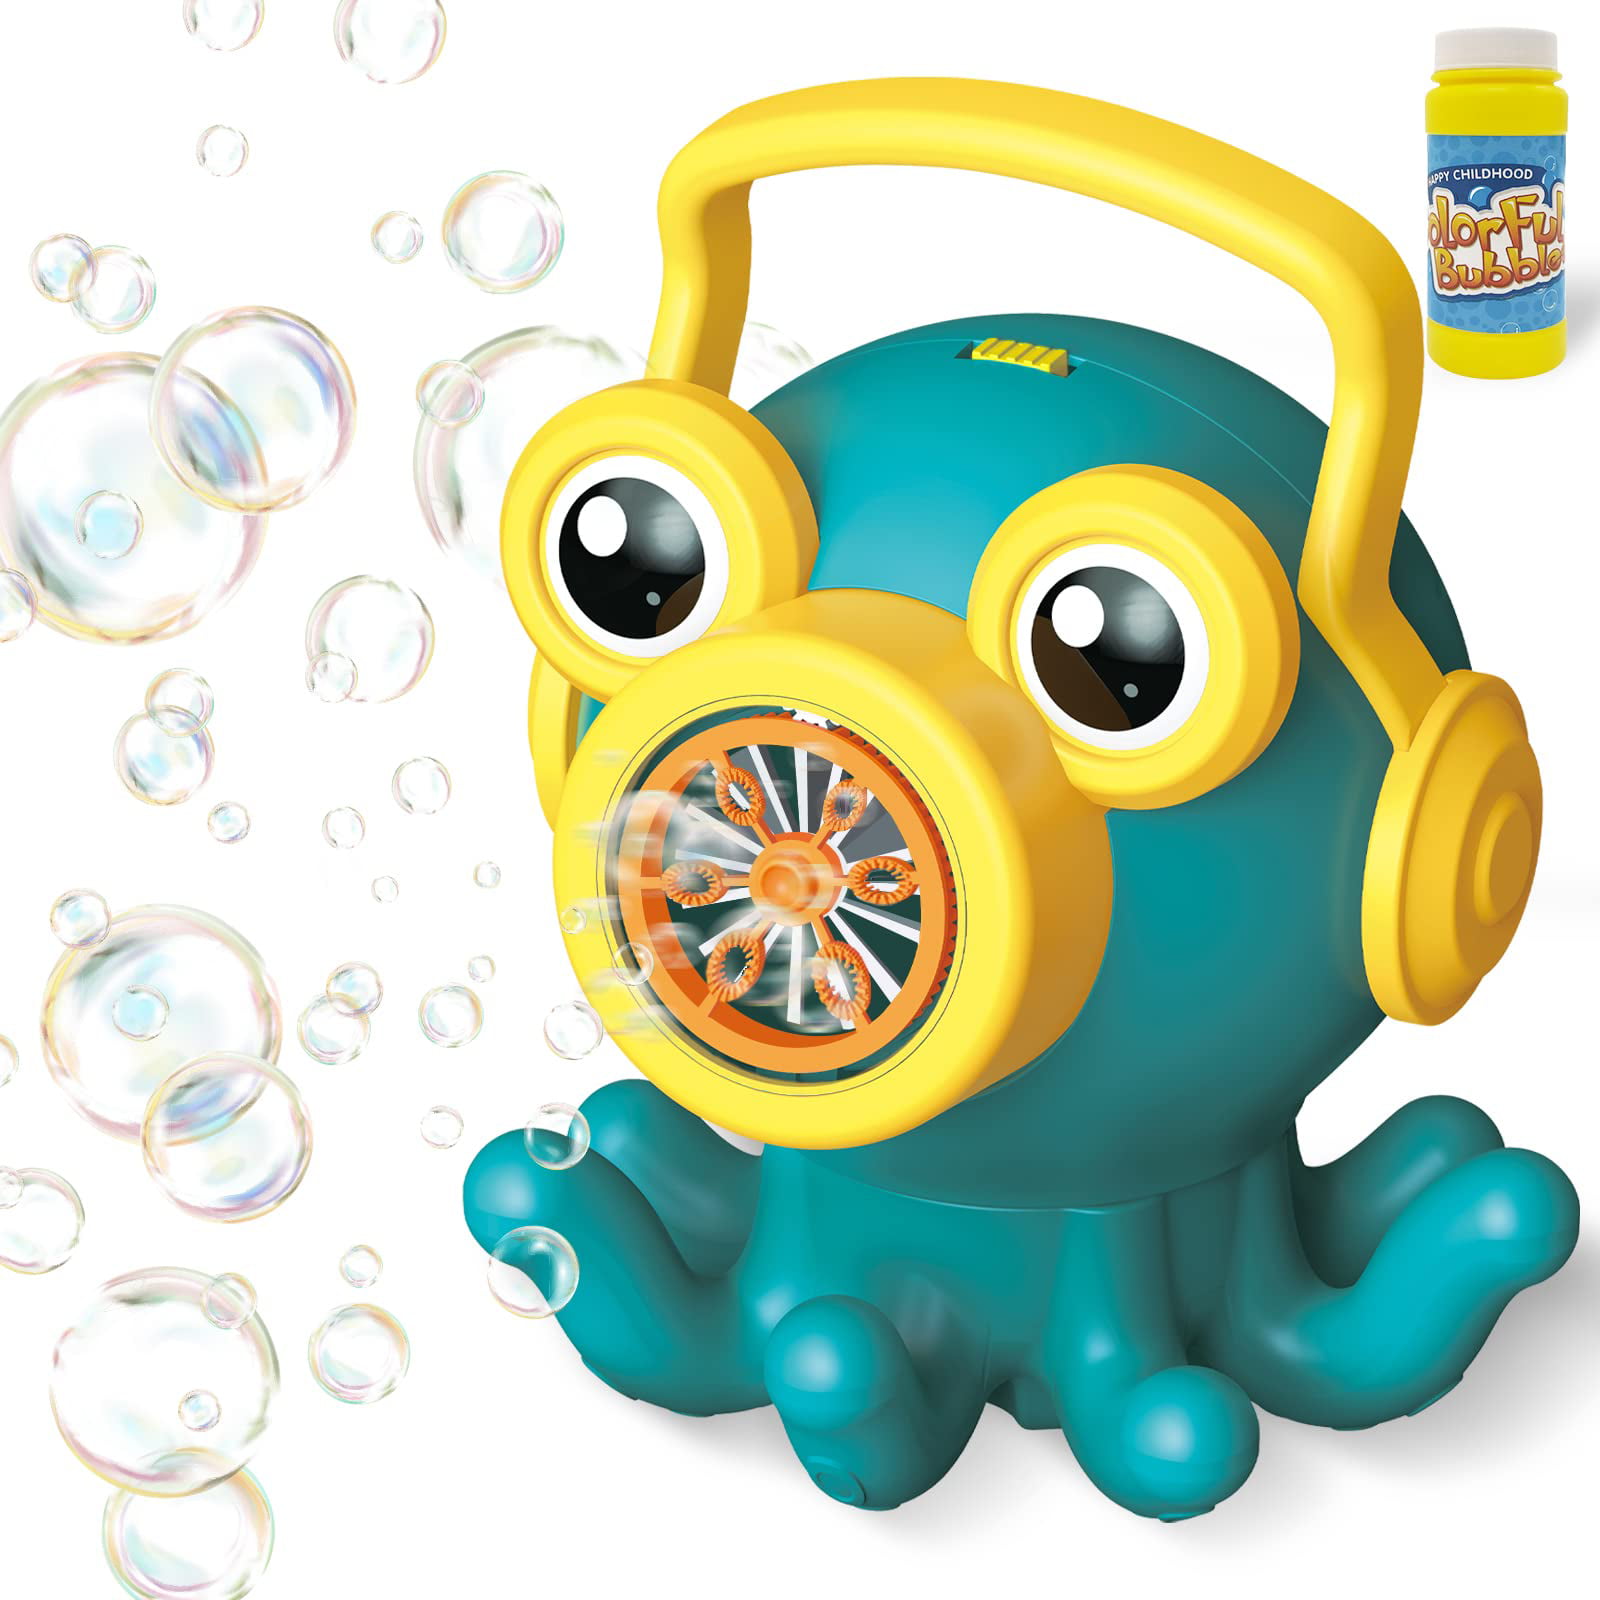 Forite Bubble Machine Automatic Bubble Blower for Kids with 2 Bubble Solution 2 Modes Octopus Bubble Maker Outdoor Water Toys for Boys Girls Toddlers 1-3 Backyard Wedding Birthday Party 